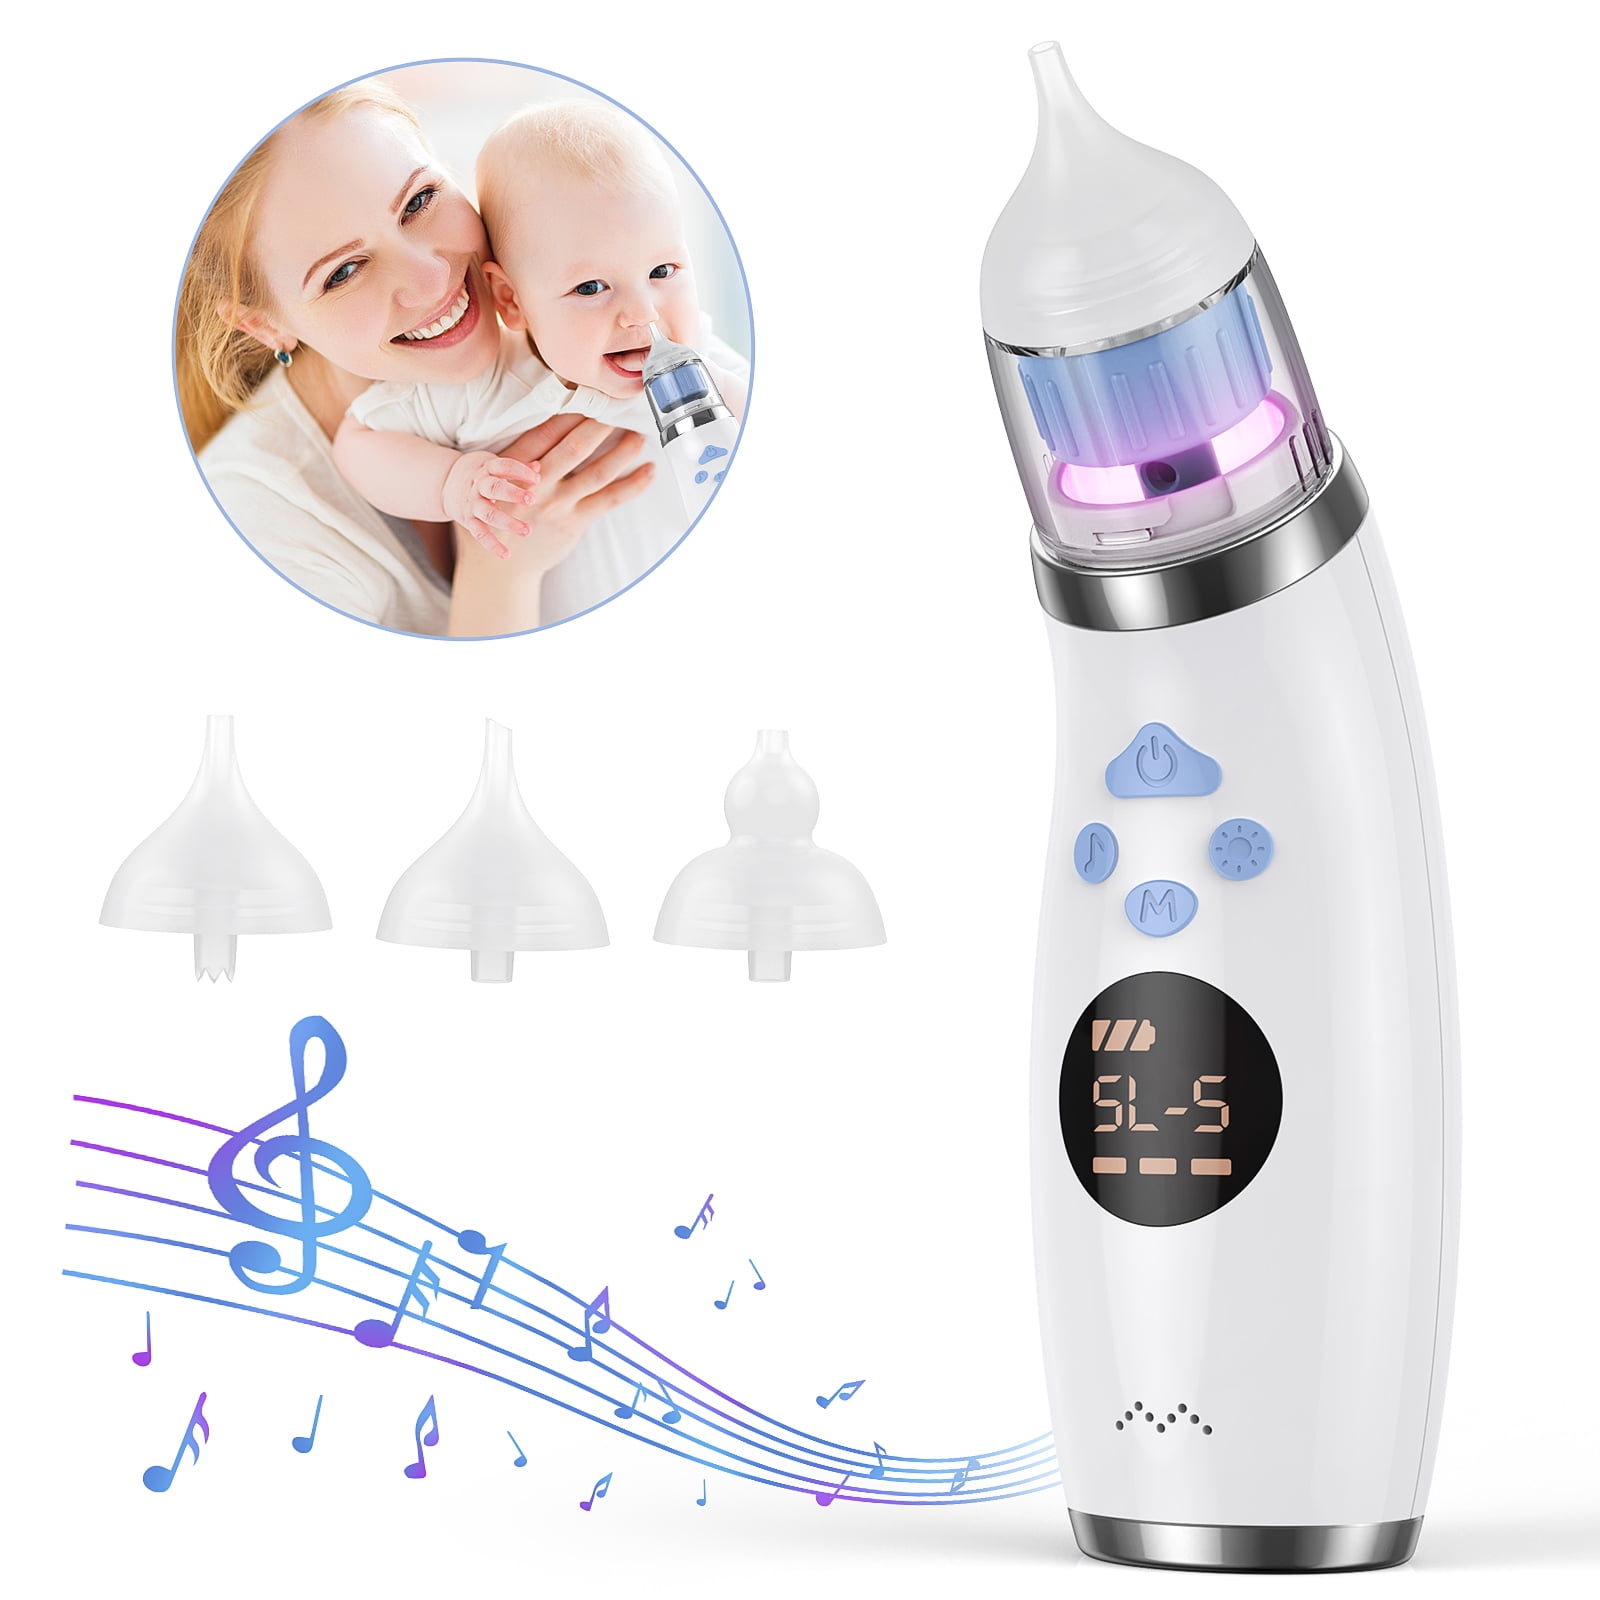 FEBFOXS Baby Nasal Aspirator, Baby Nose Sucker, Electric Nose Aspirator for  Toddler, Automatic Baby Nose Cleaner with 3 Suction Level & Music & Light